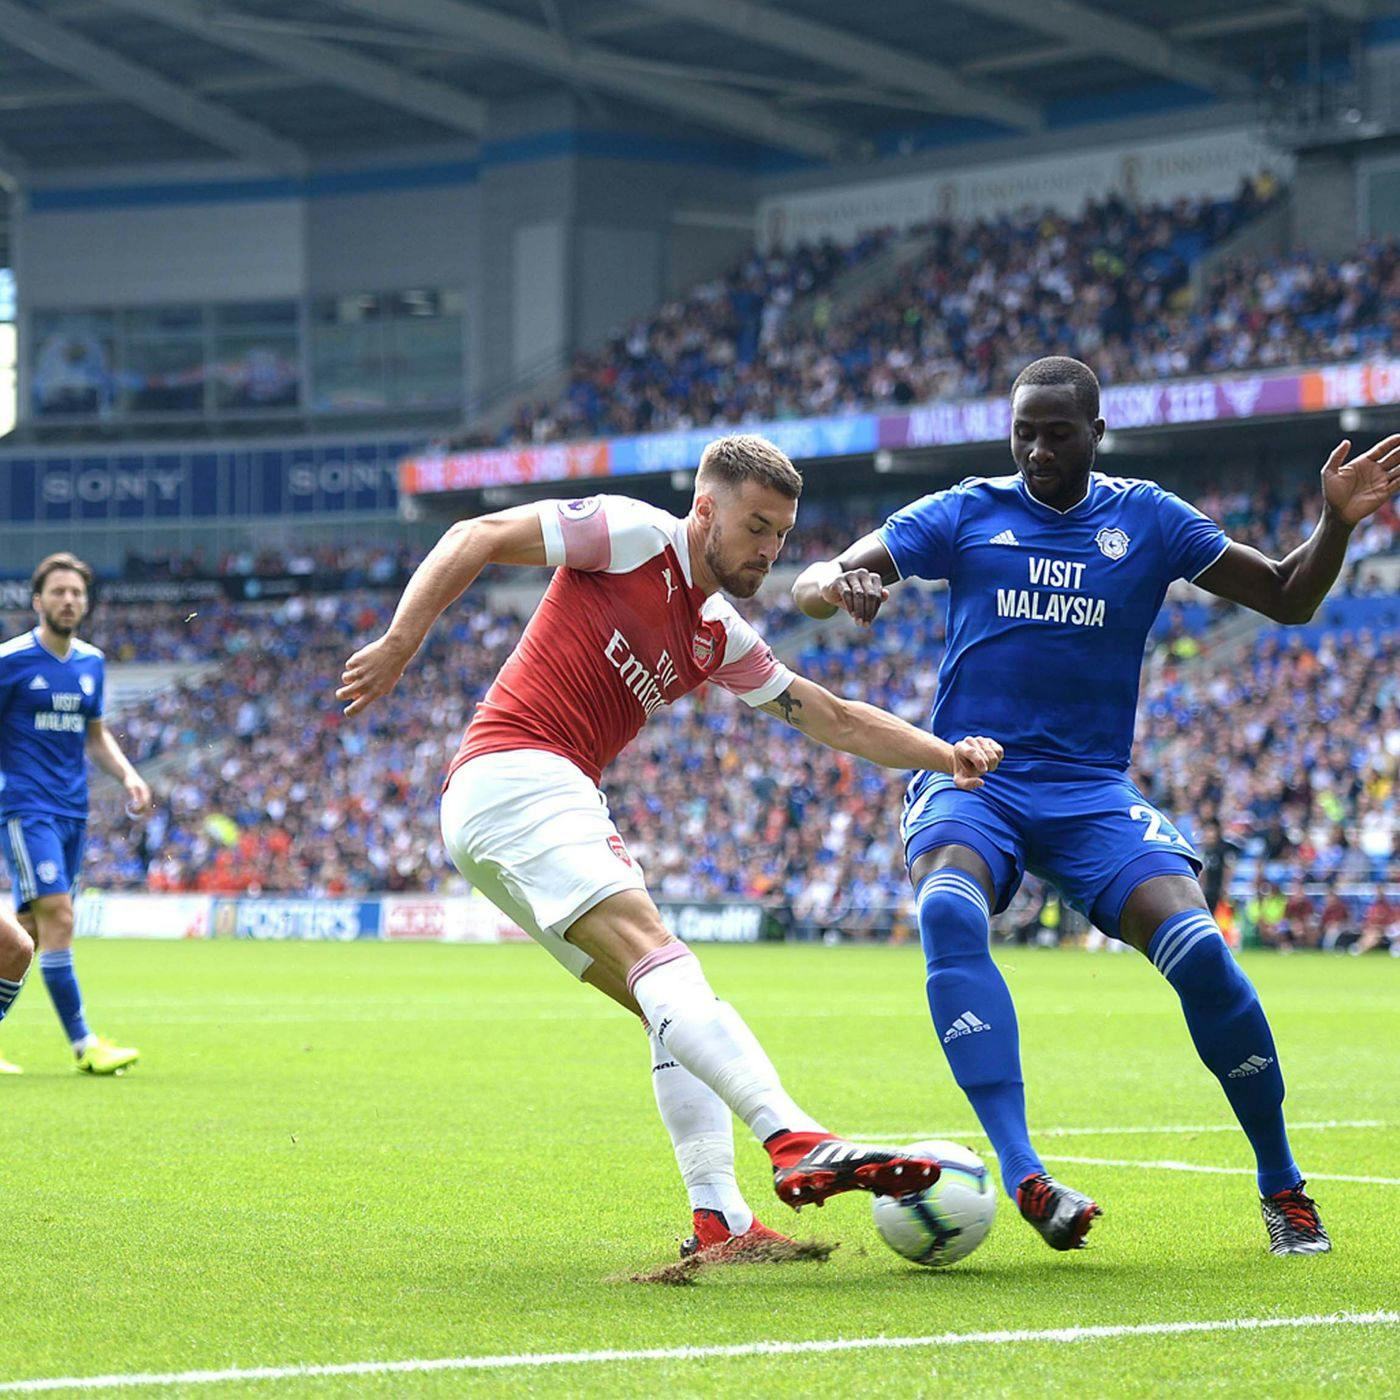 Cardiff's 16-pass goal, left back debate and signing Aaron Ramsey